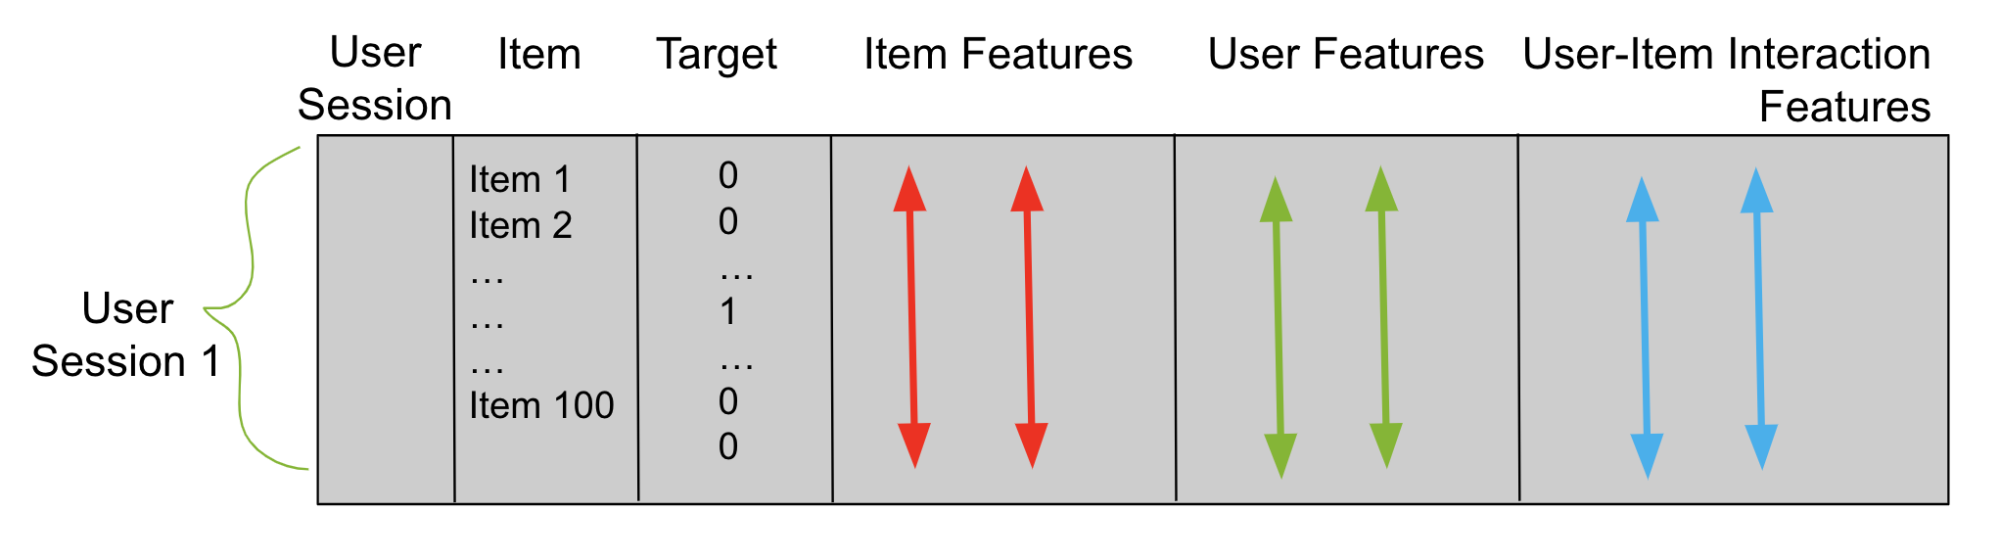 Diagram shows different type of features: item, user, and user-item interaction.